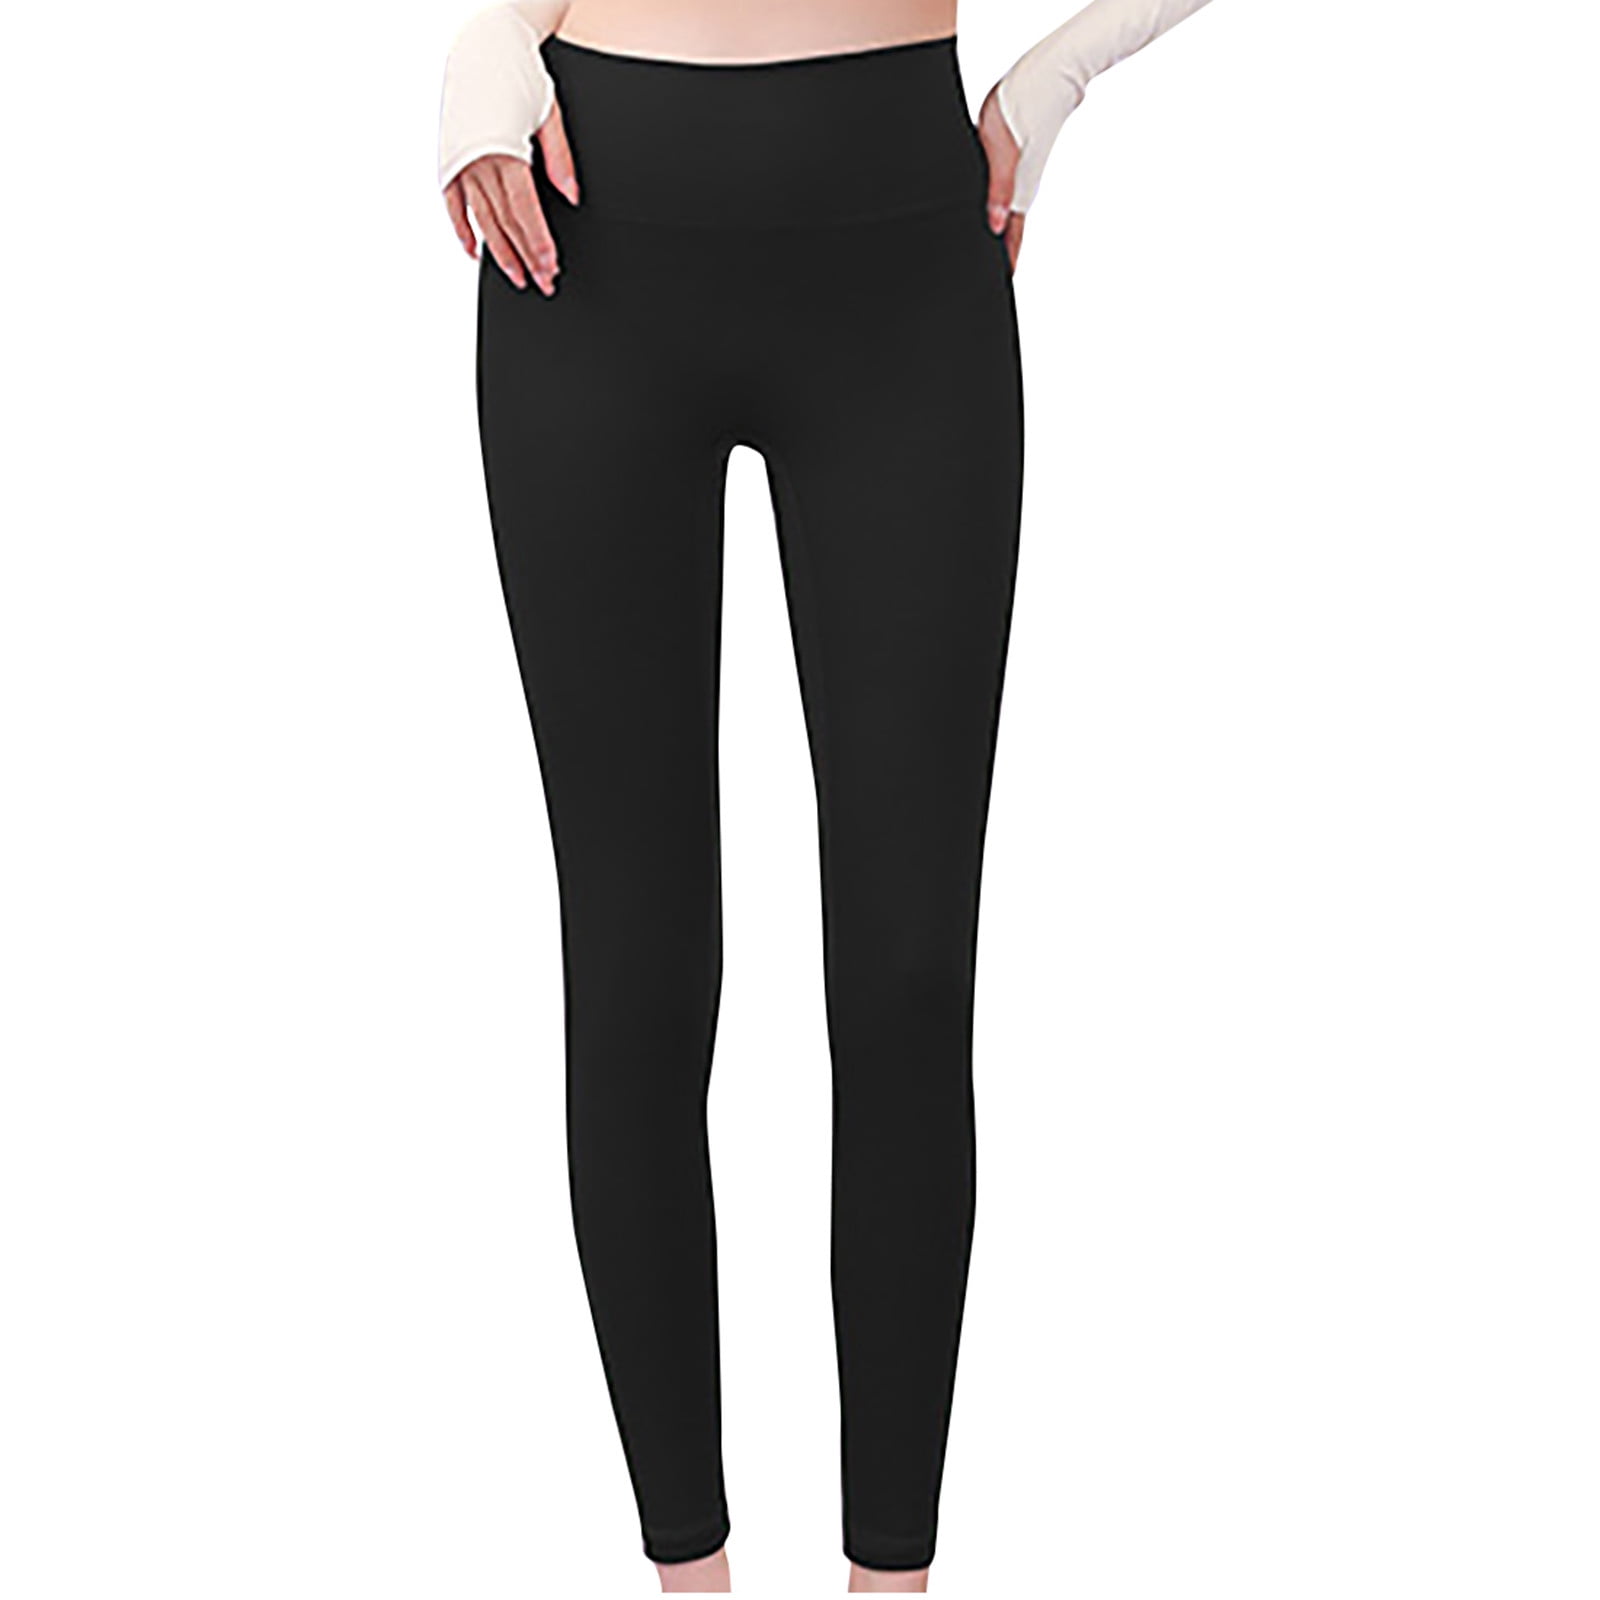 JWZUY Women's High Waist Solid Color Hip Lifting Exercise Fitness Tight Yoga  Pants Black S 